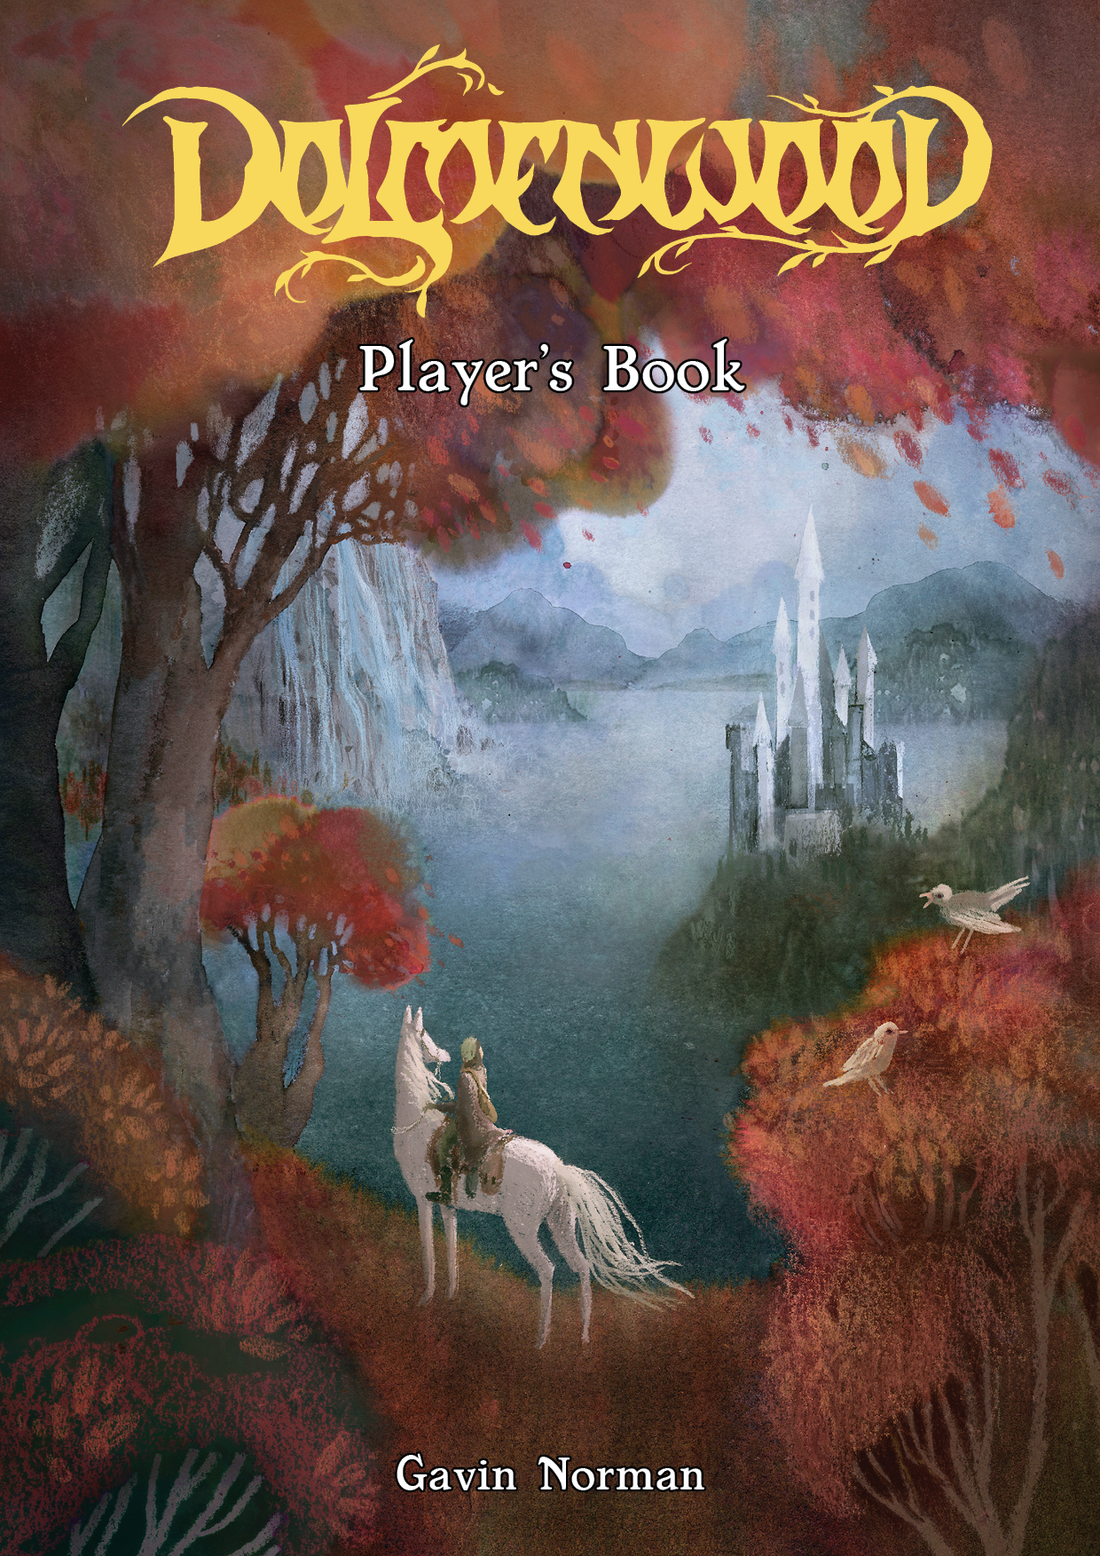 Preview: Dolmenwood Player's Book Cover!